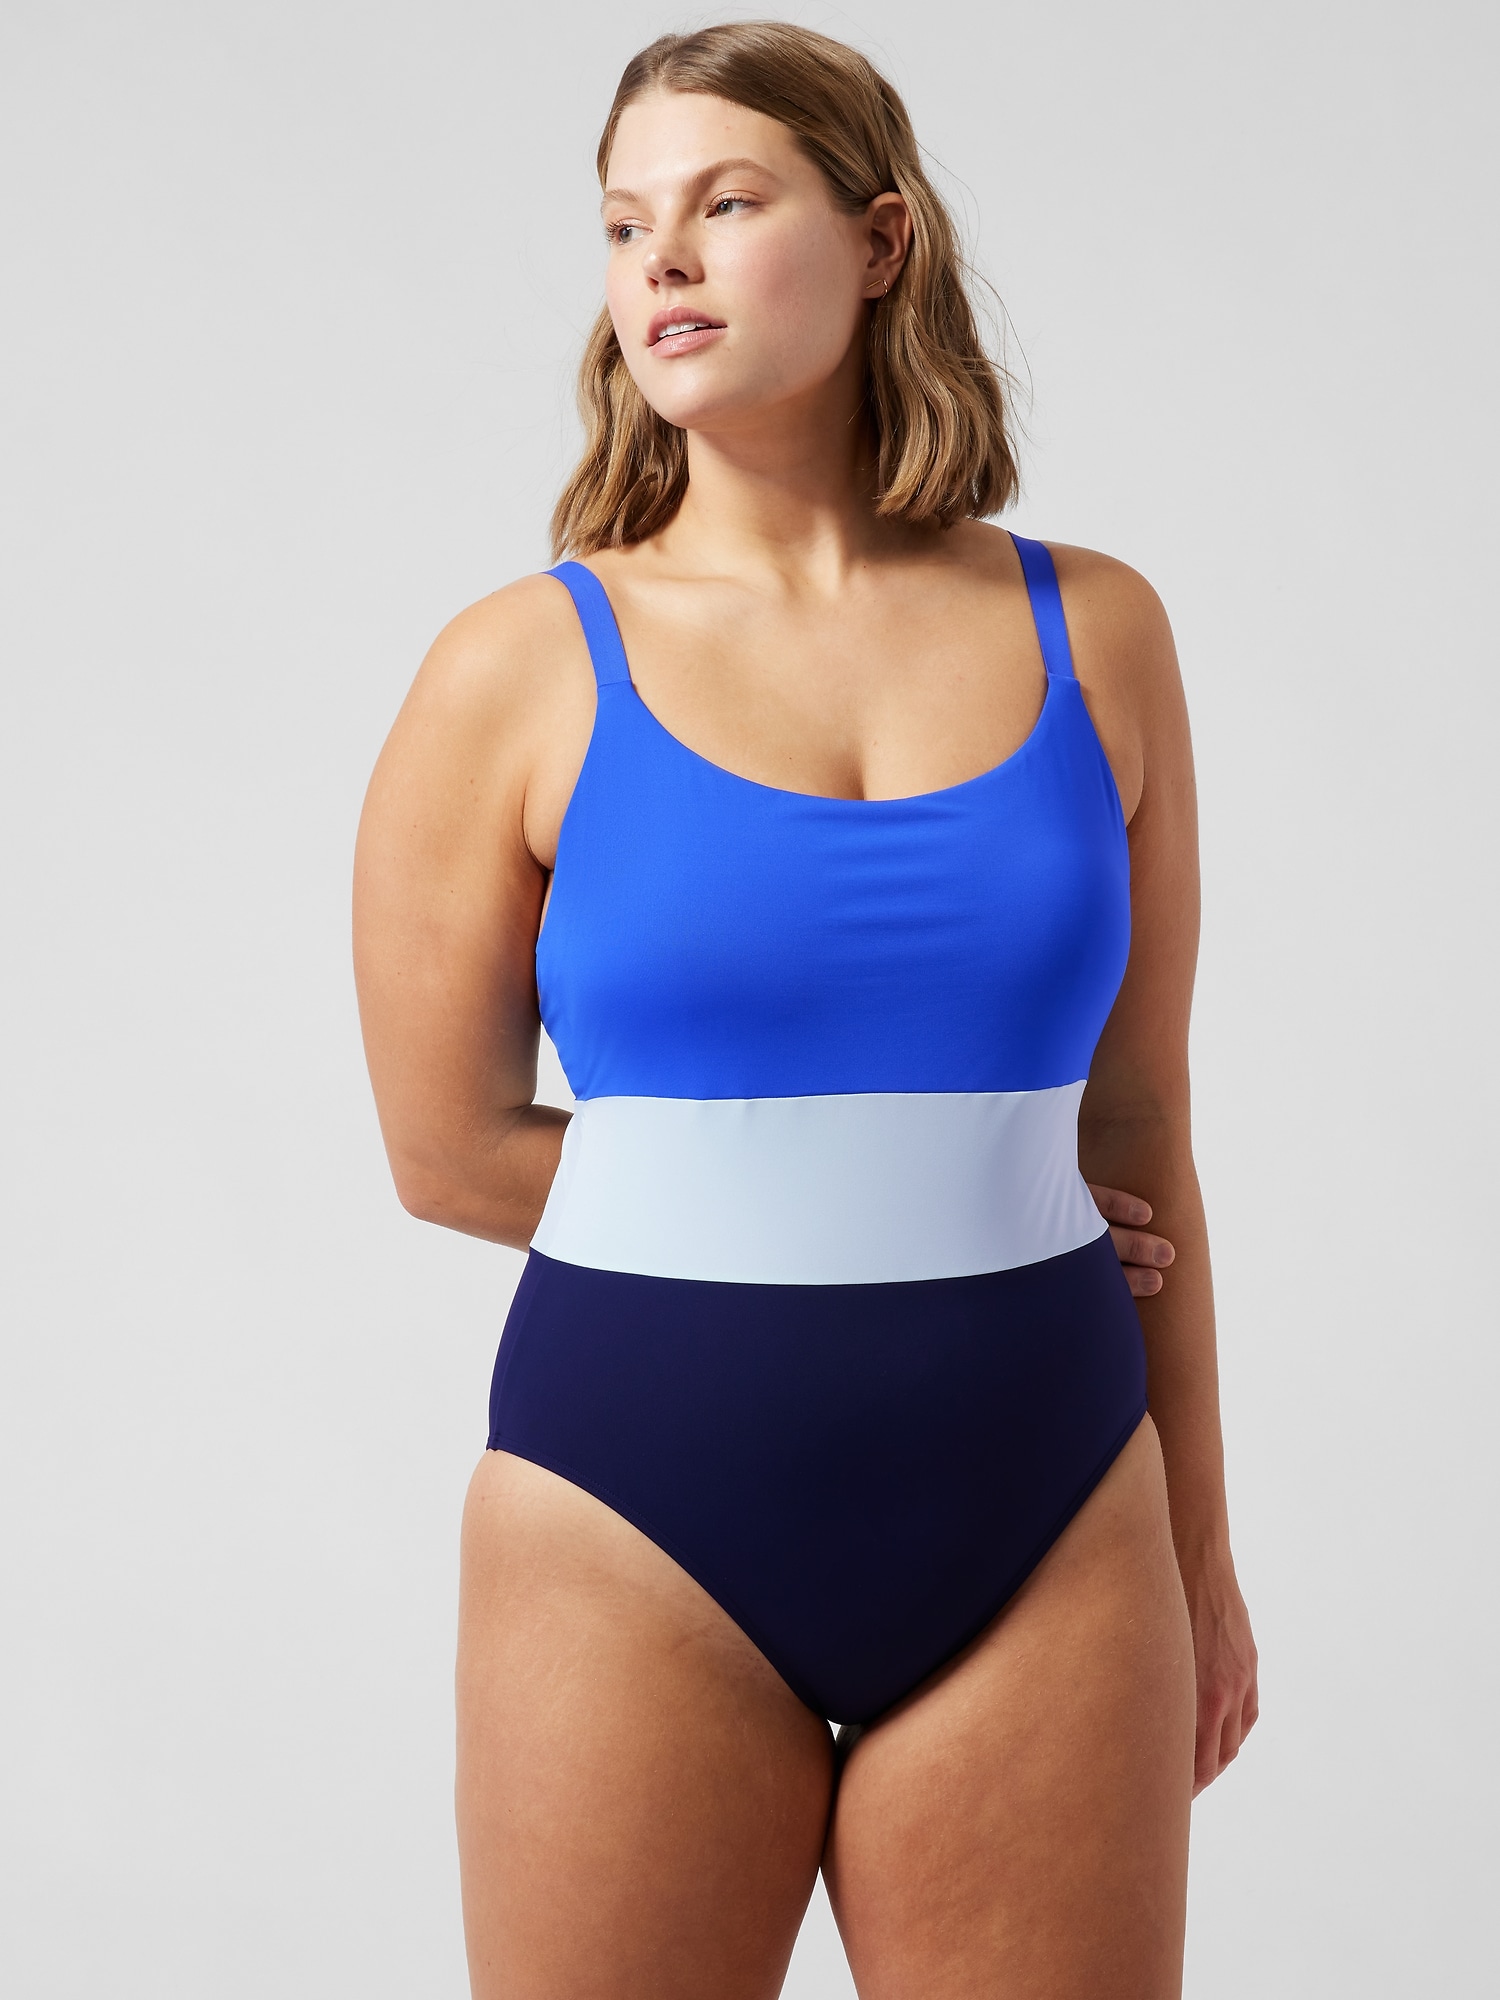  One Piece Swimsuits For Tall Women